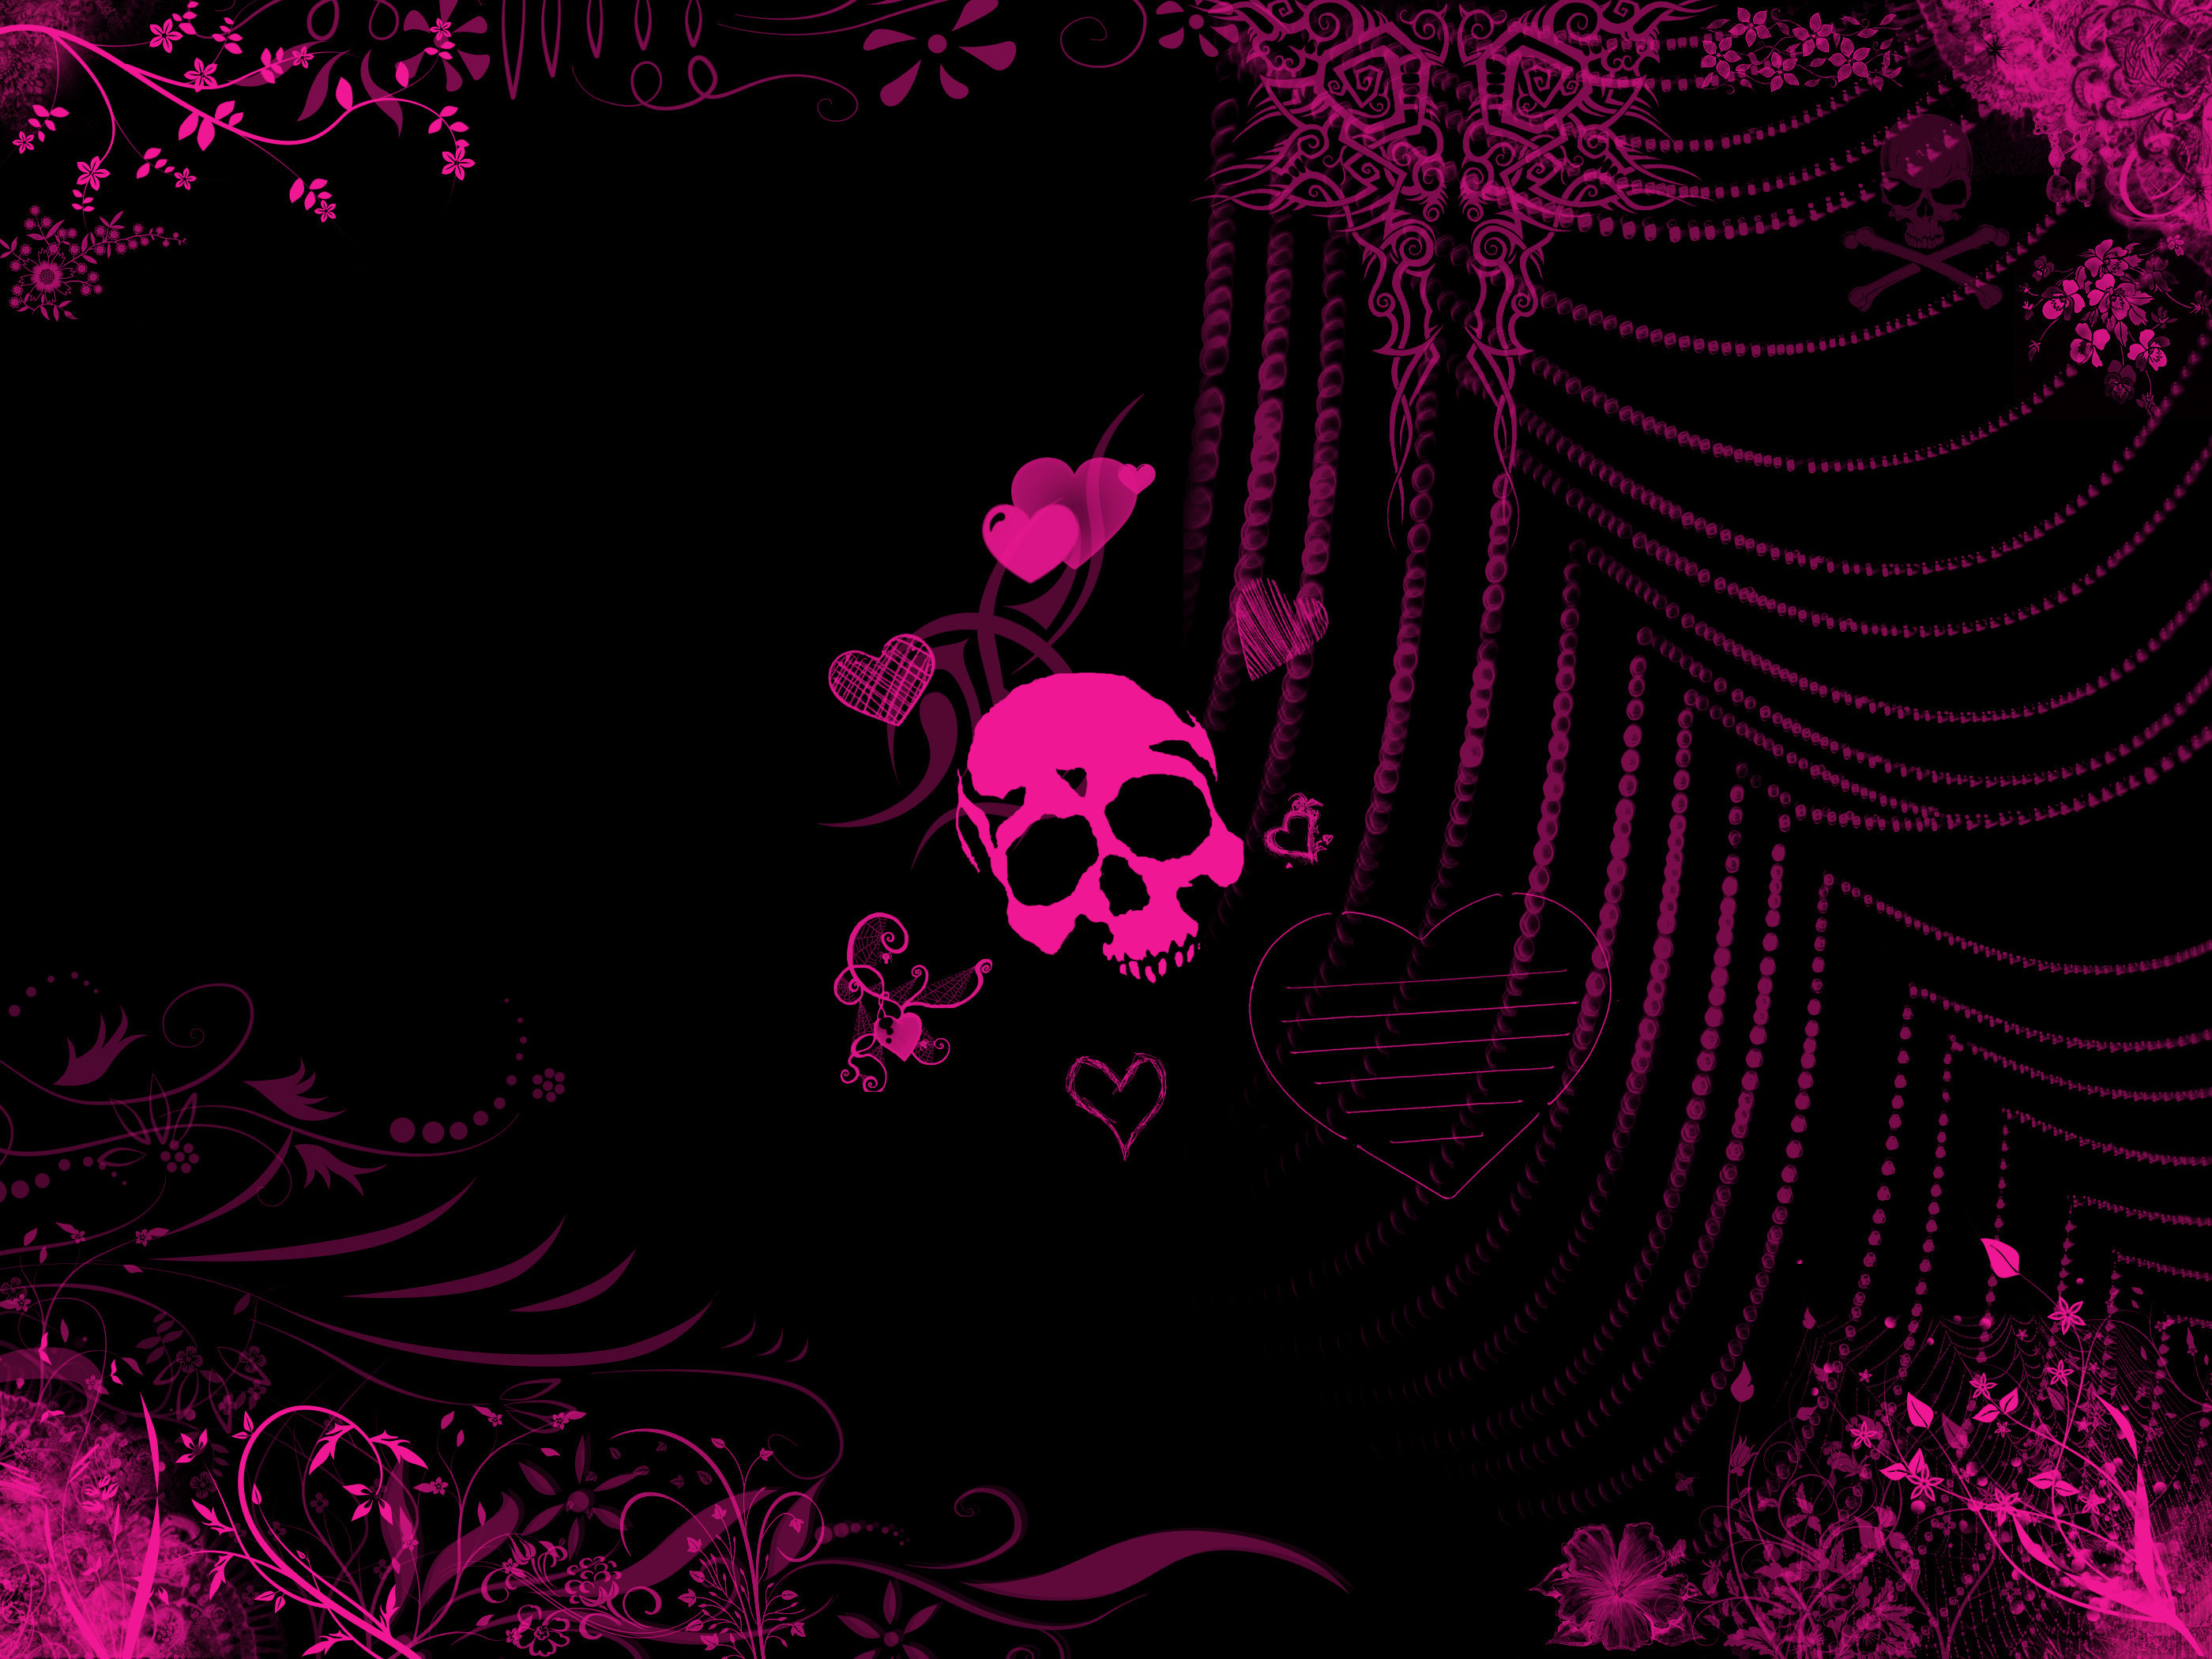 2800x2100, Pink And Black Wallpaper Backgrounds 2 High , HD Wallpaper & Backgrounds